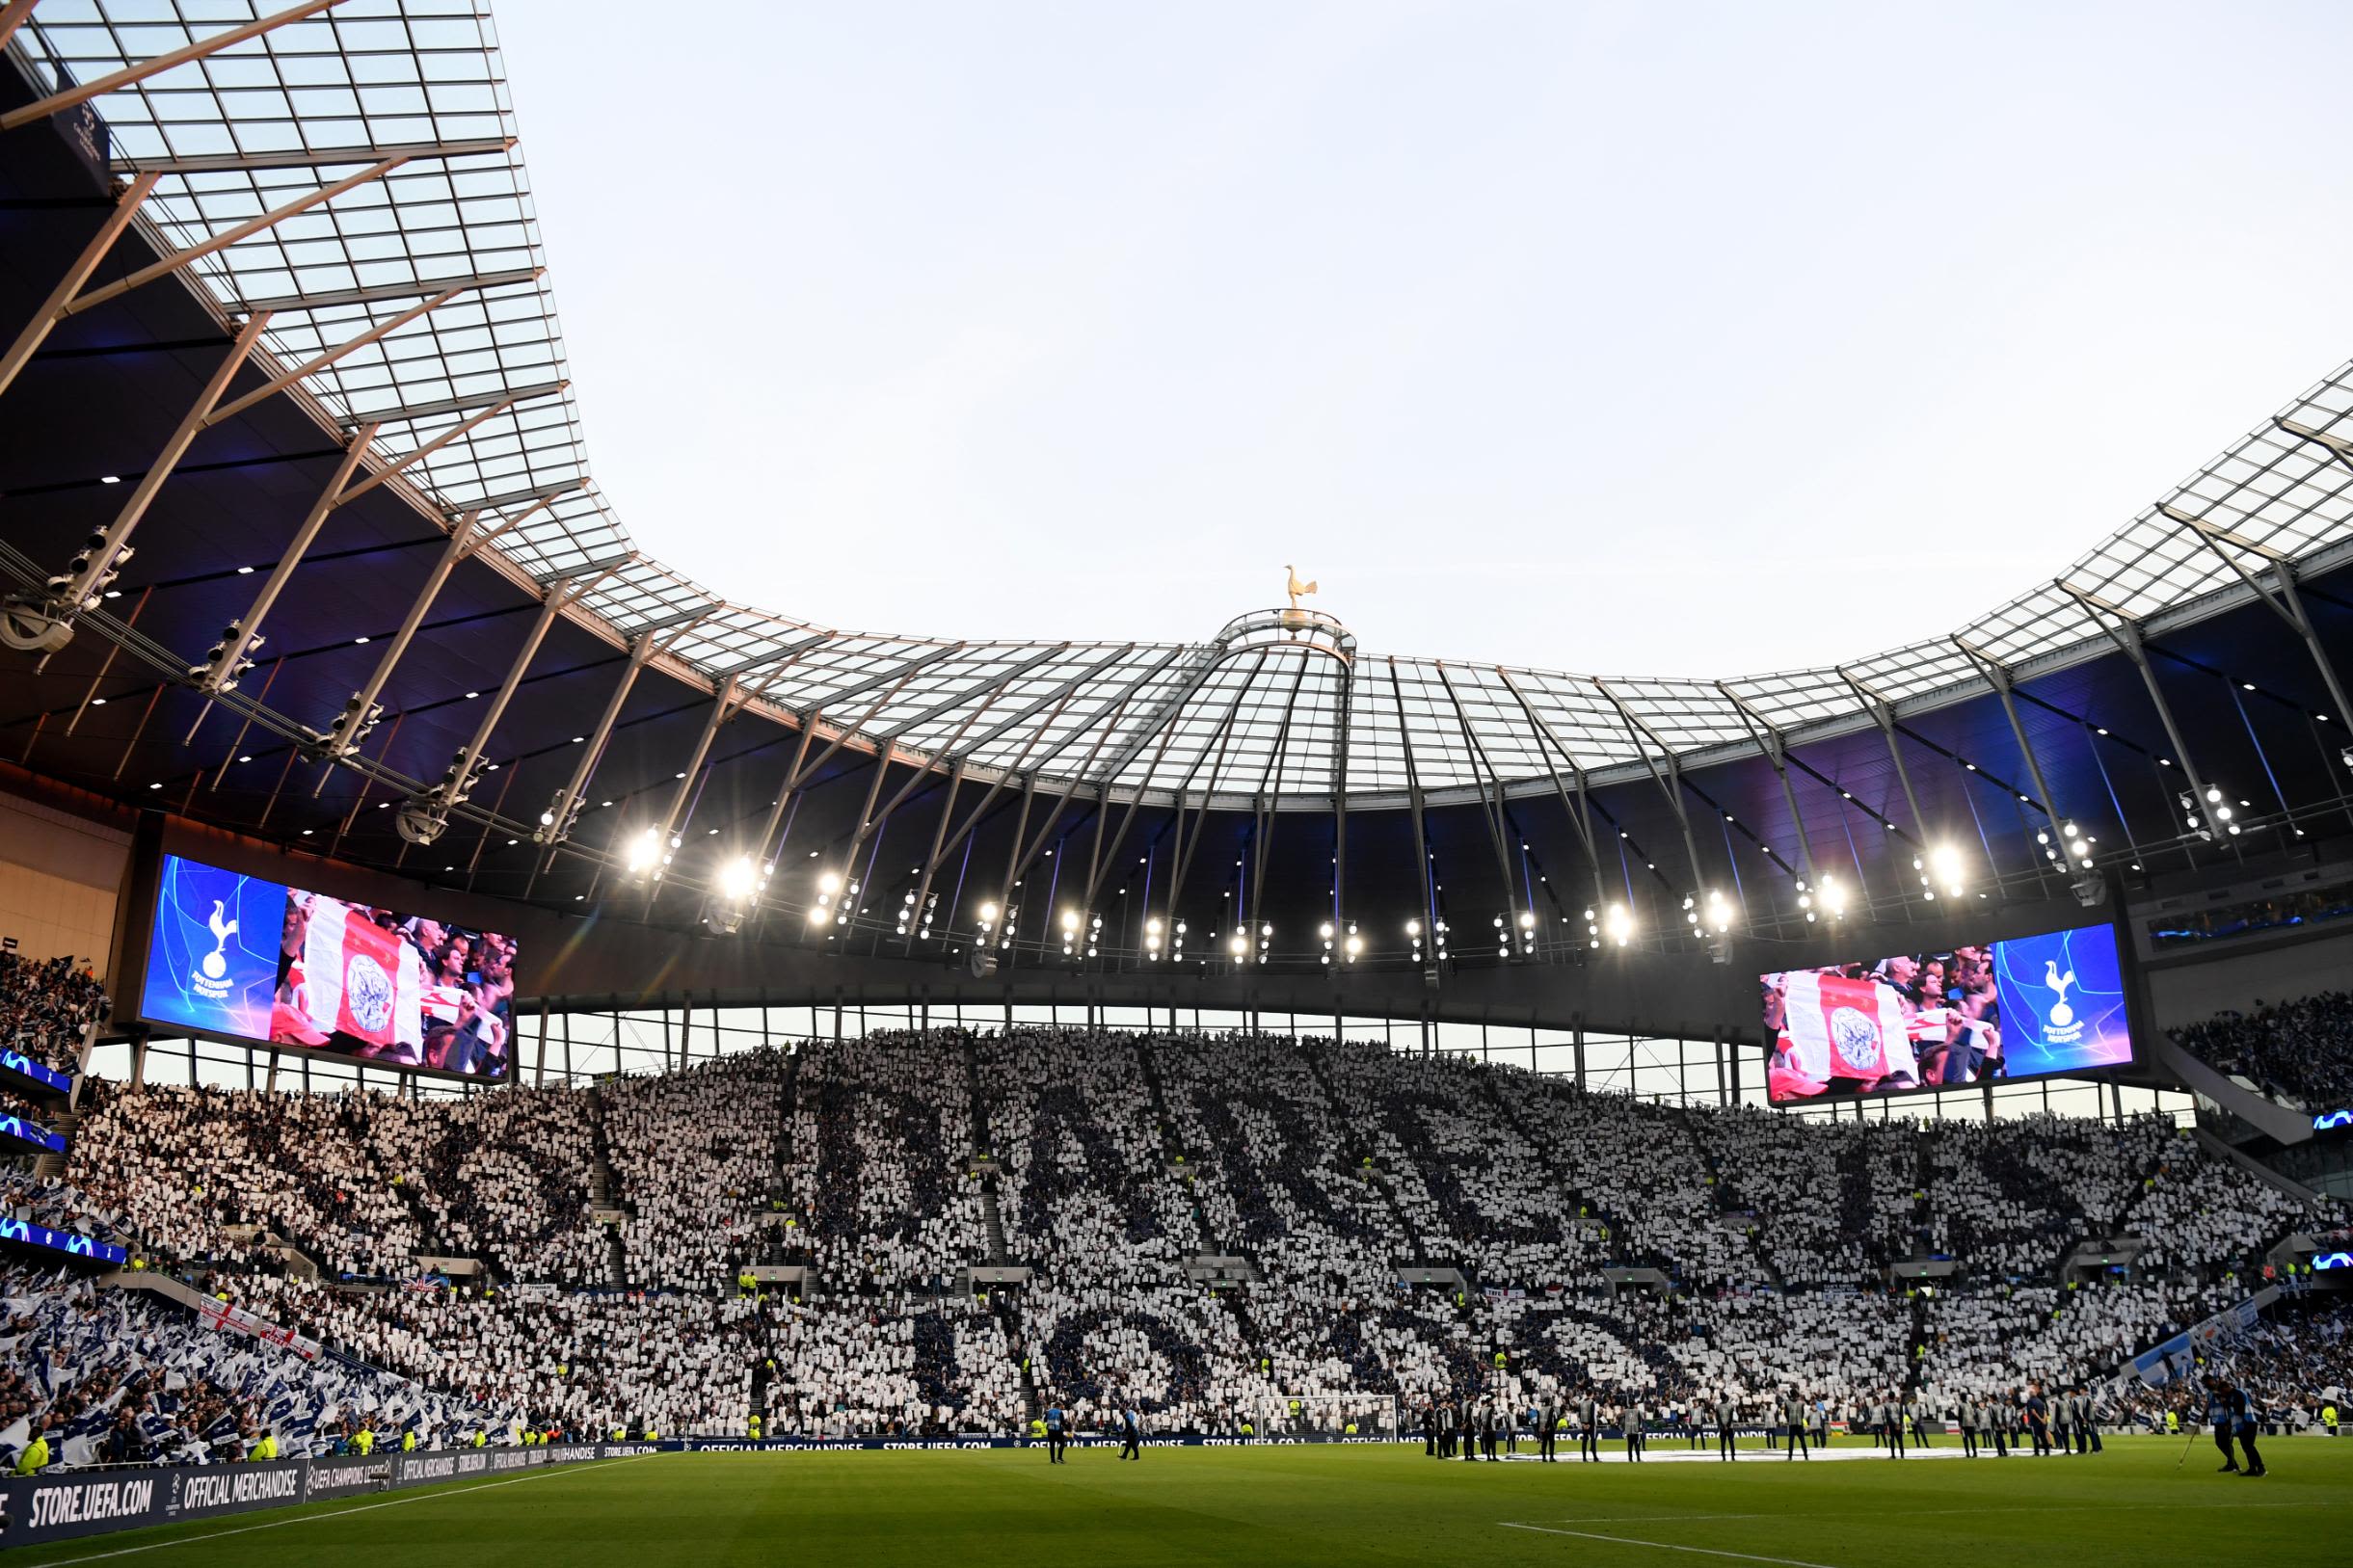 The Tottenham Hotspur Supporters' Trust and the problem with Spurs